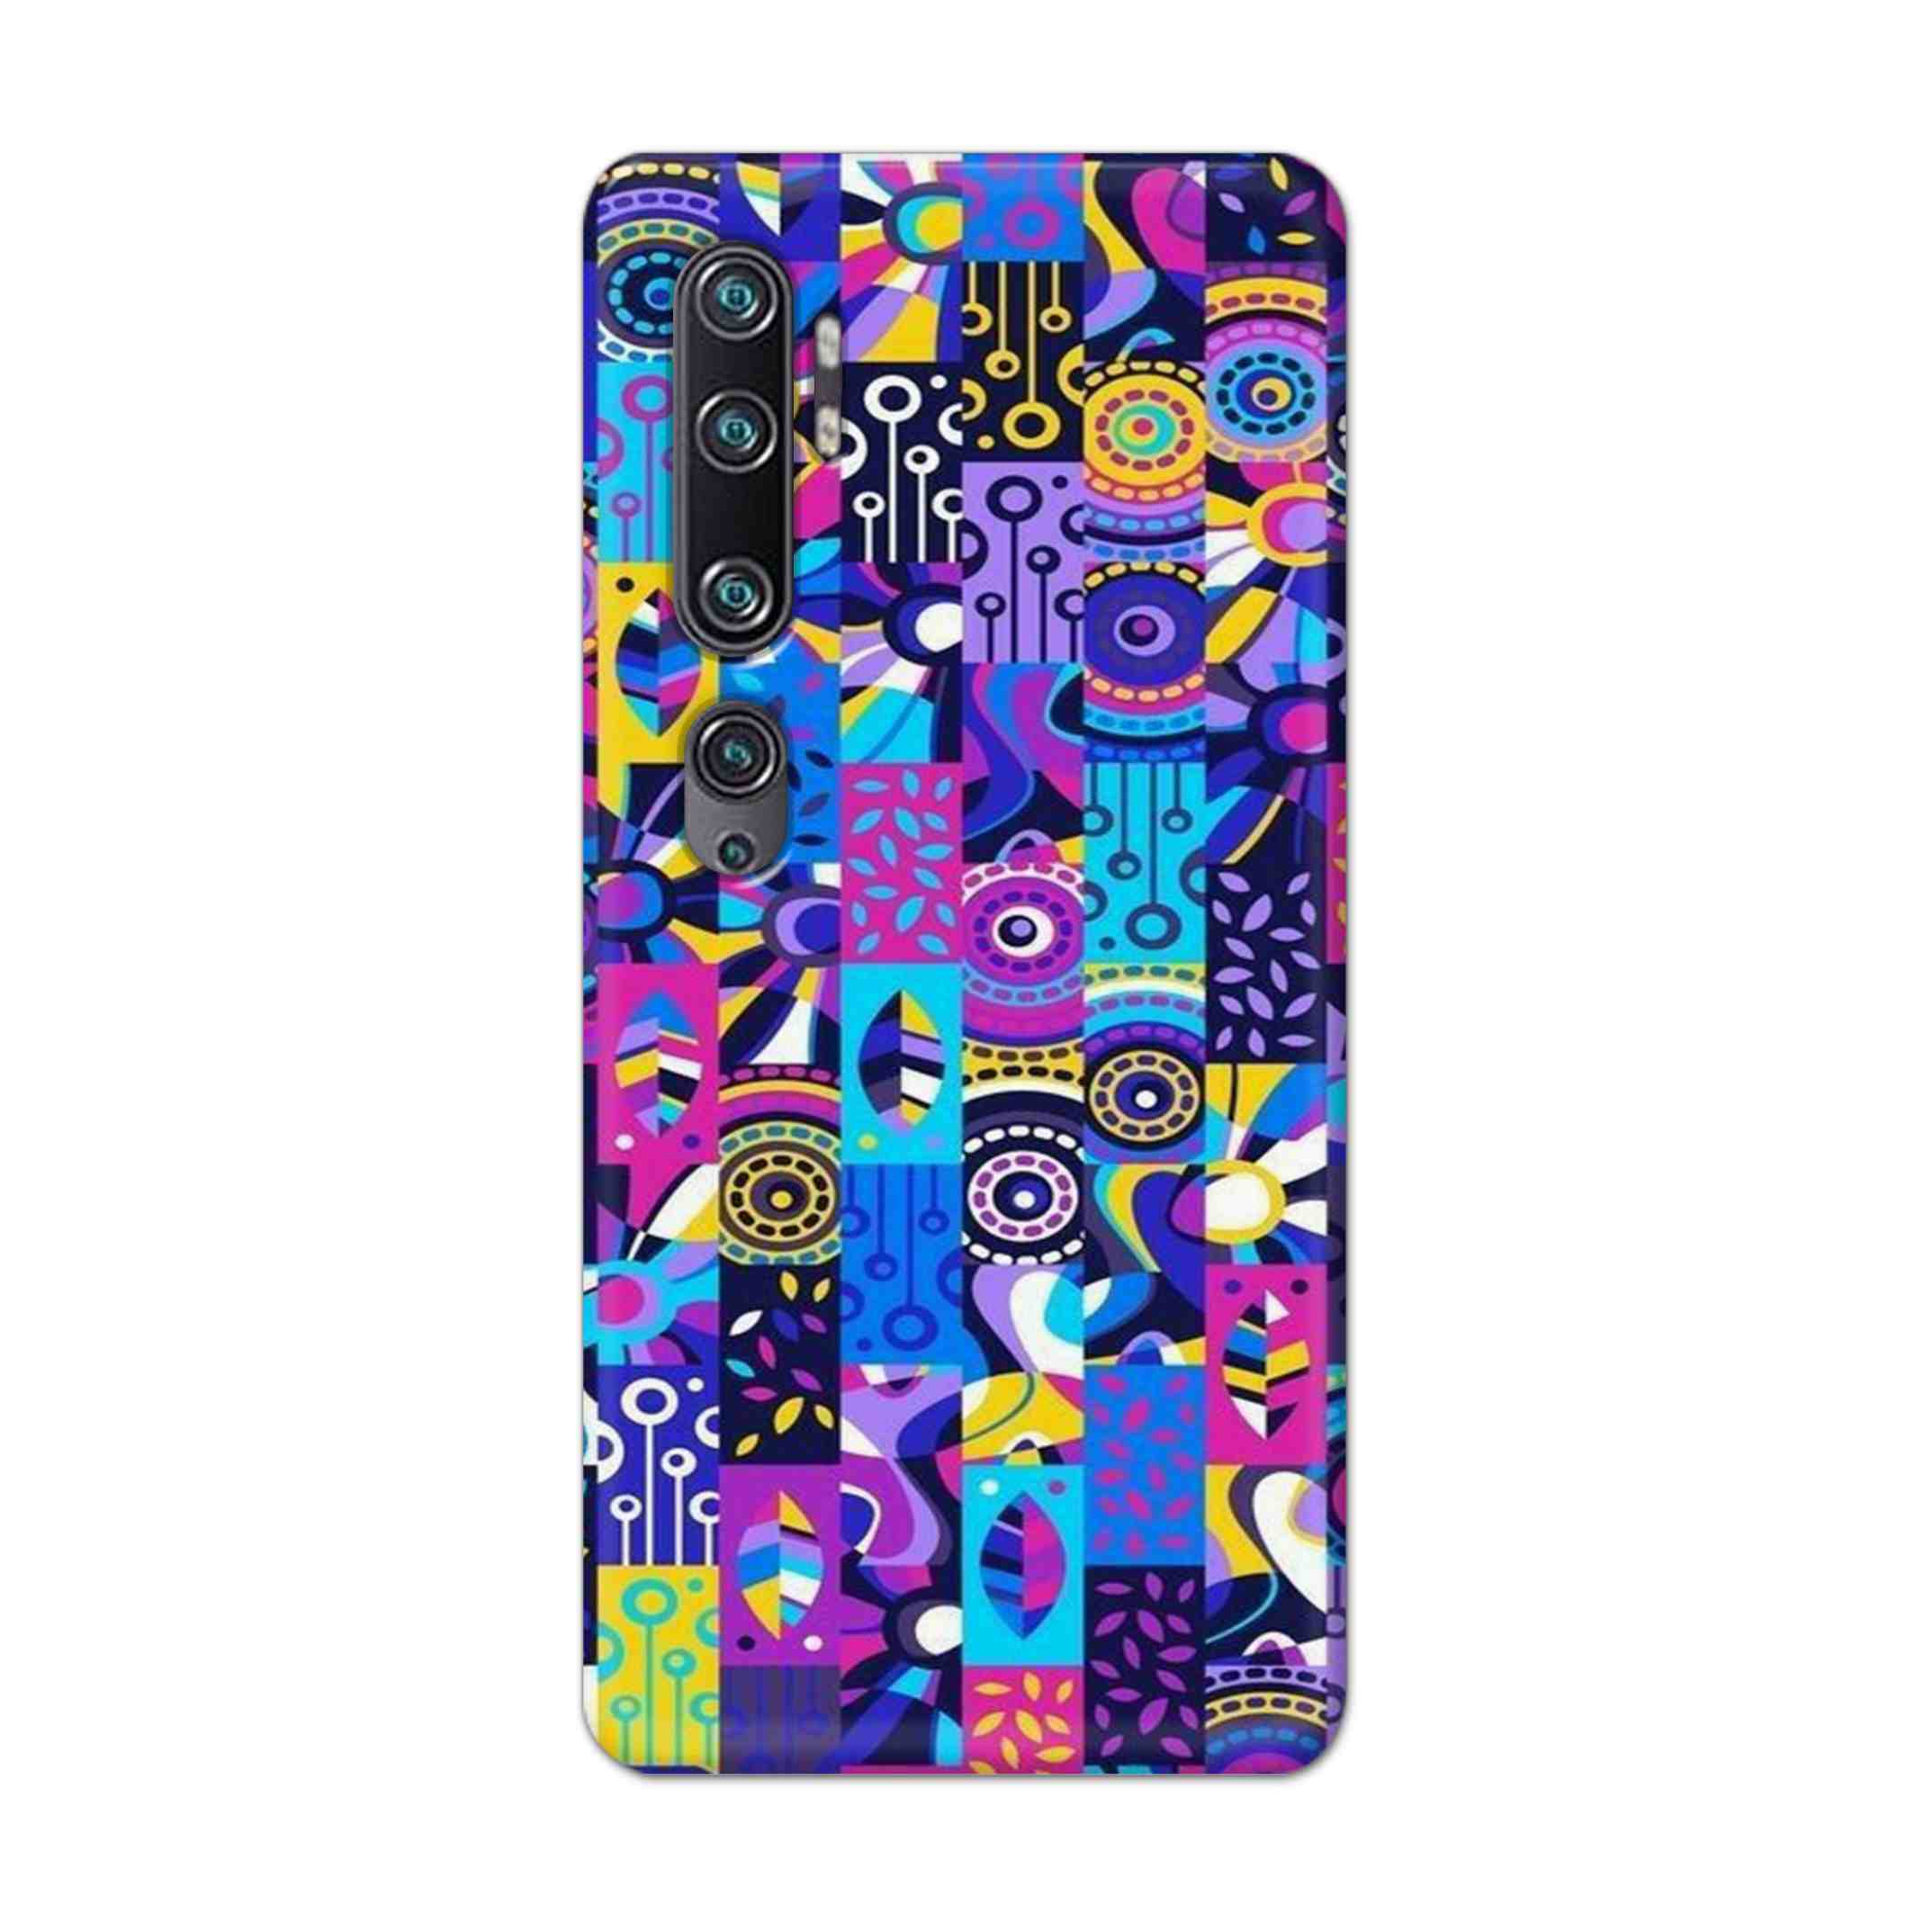 Buy Rainbow Art Hard Back Mobile Phone Case Cover For Xiaomi Mi Note 10 Online